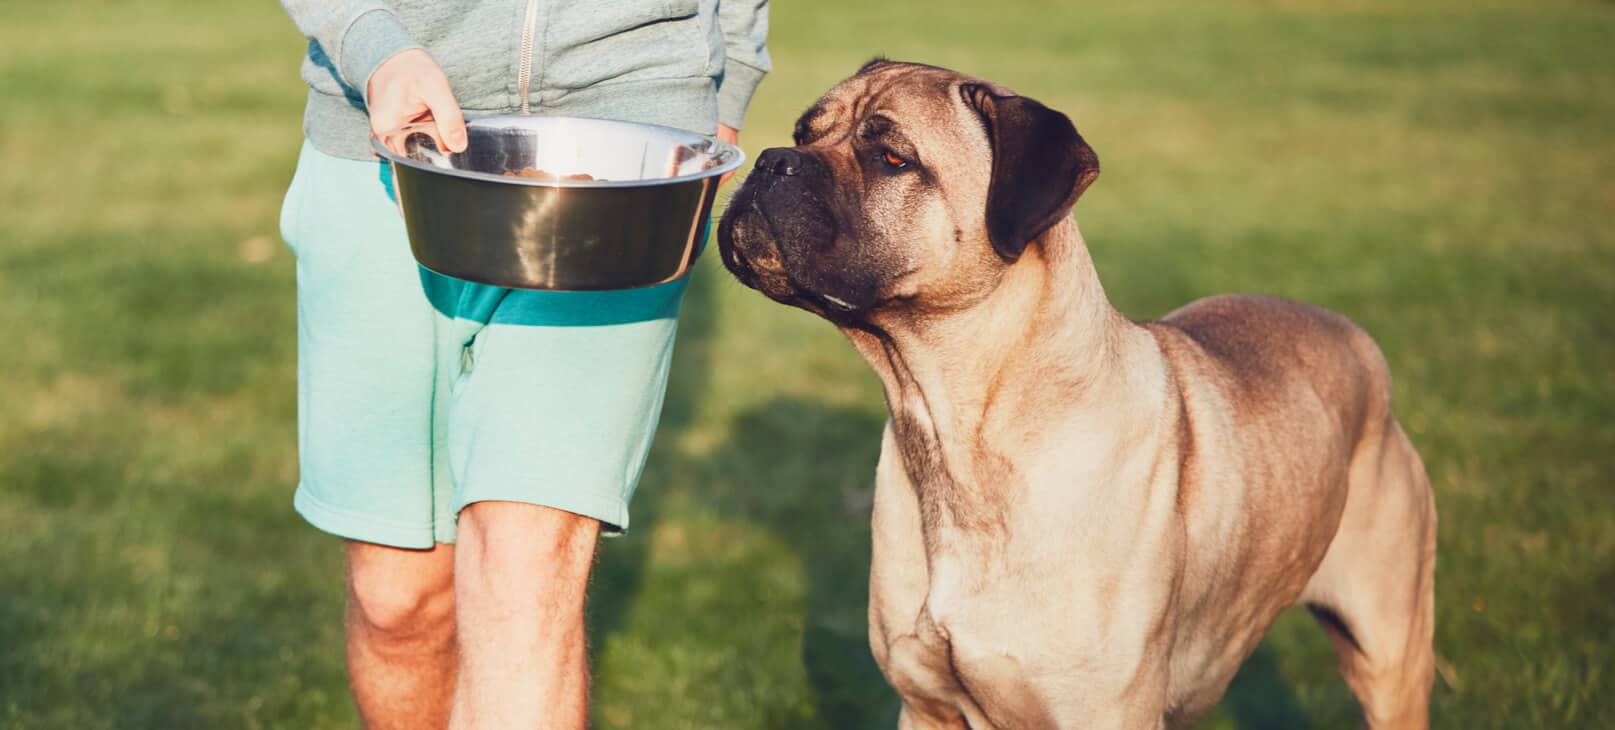 Pet owner holding a metal bowl of food in front of a large dog standing outside in grass